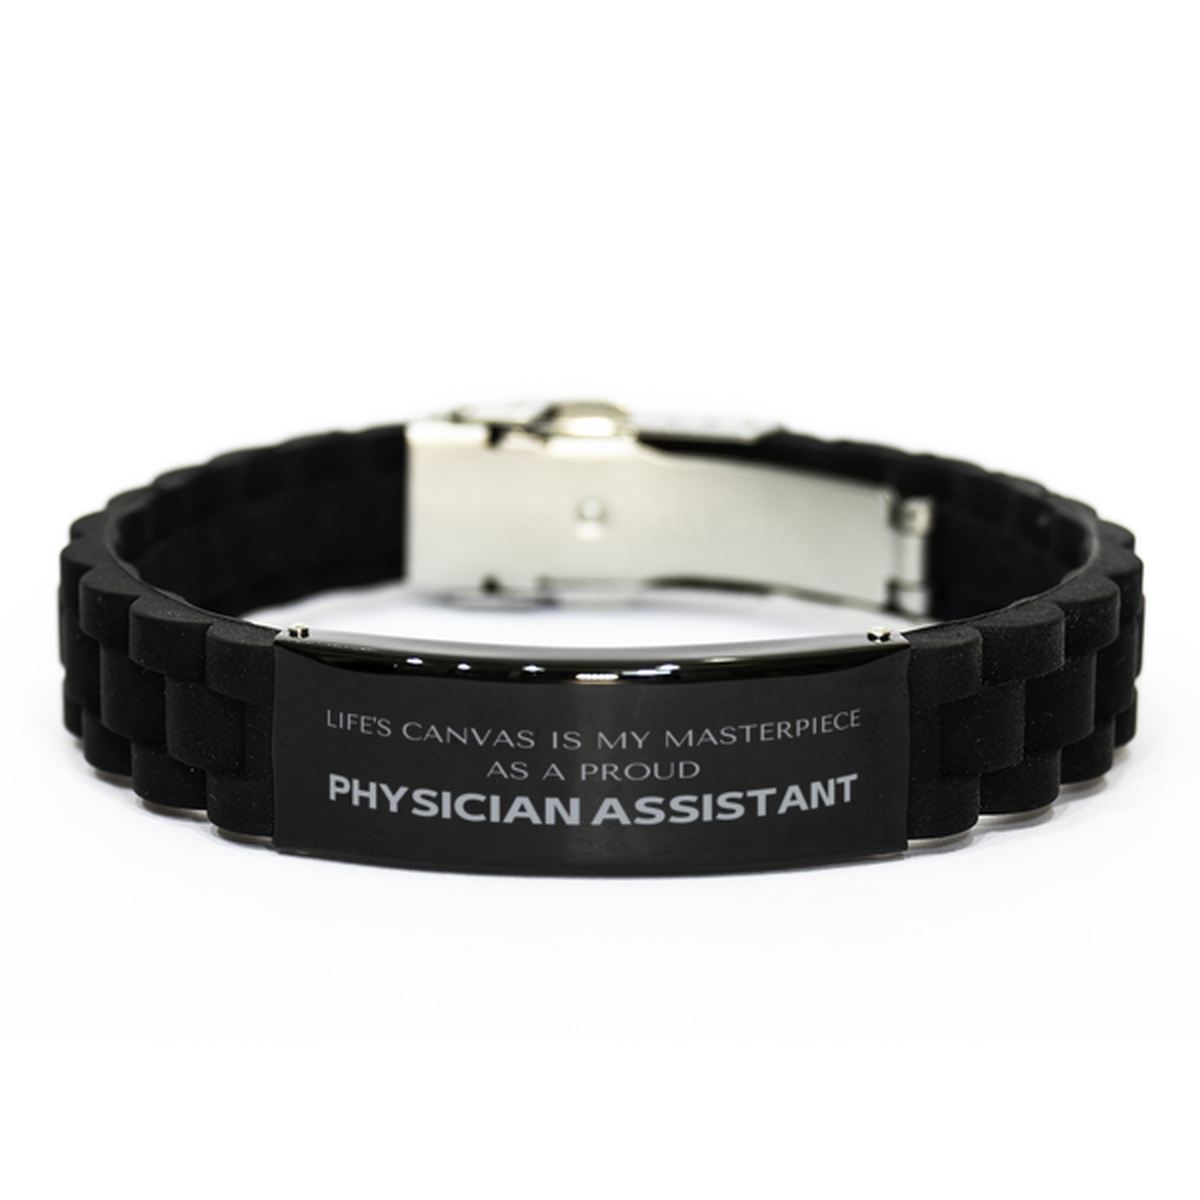 Proud Physician Assistant Gifts, Life's canvas is my masterpiece, Epic Birthday Christmas Unique Black Glidelock Clasp Bracelet For Physician Assistant, Coworkers, Men, Women, Friends